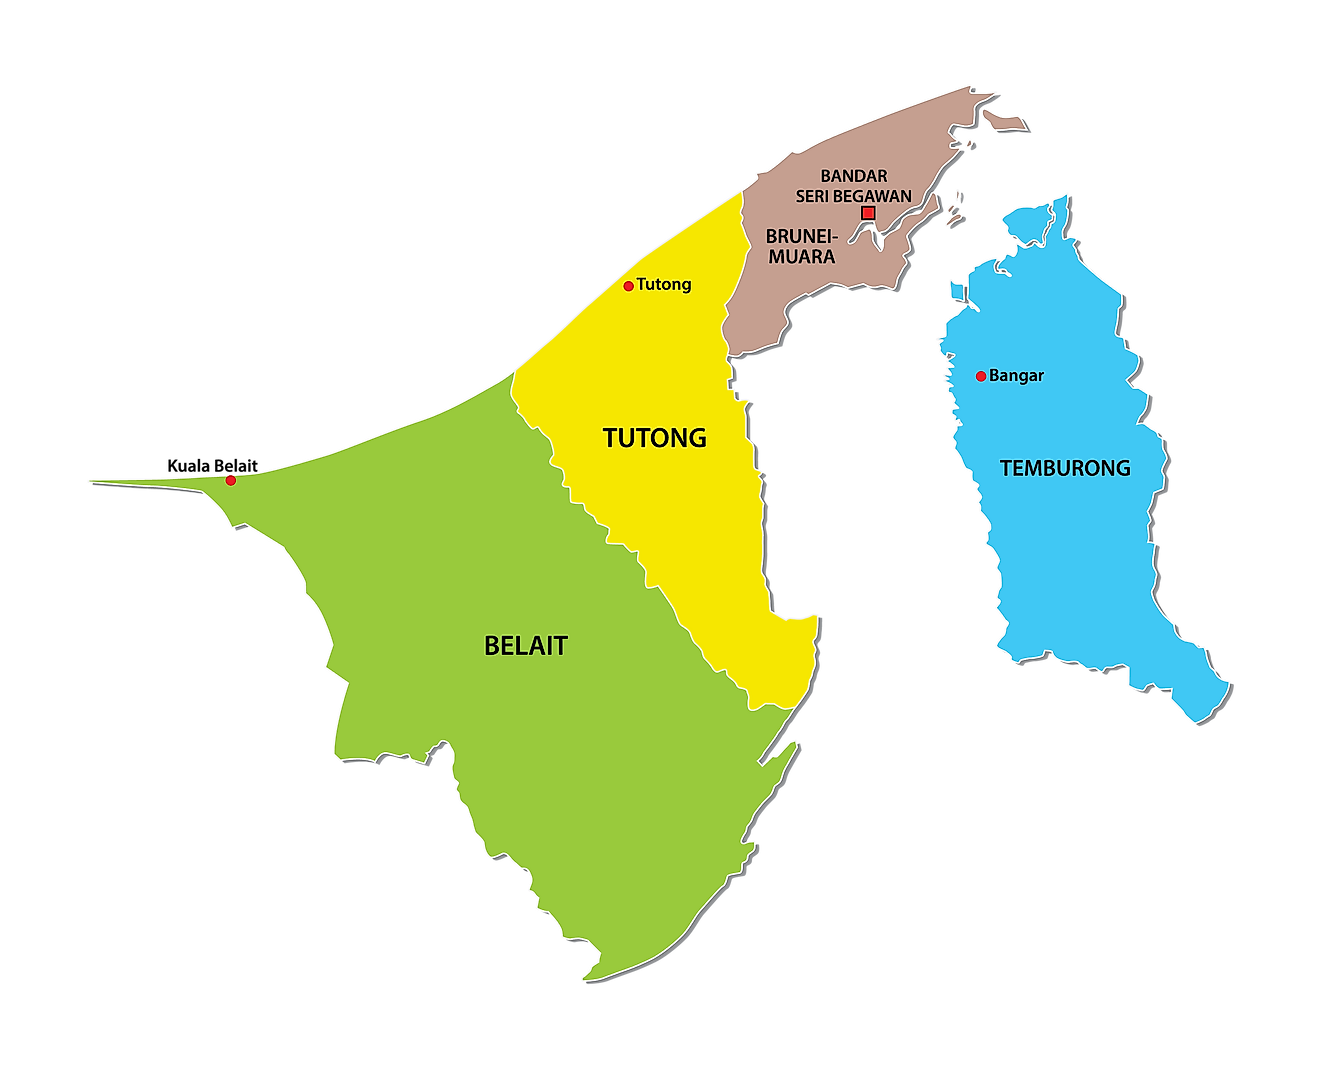 Political Map of Brunei showing the 4 districts of Brunei, important urban centres and the national capital of Bander Seri Begawan.